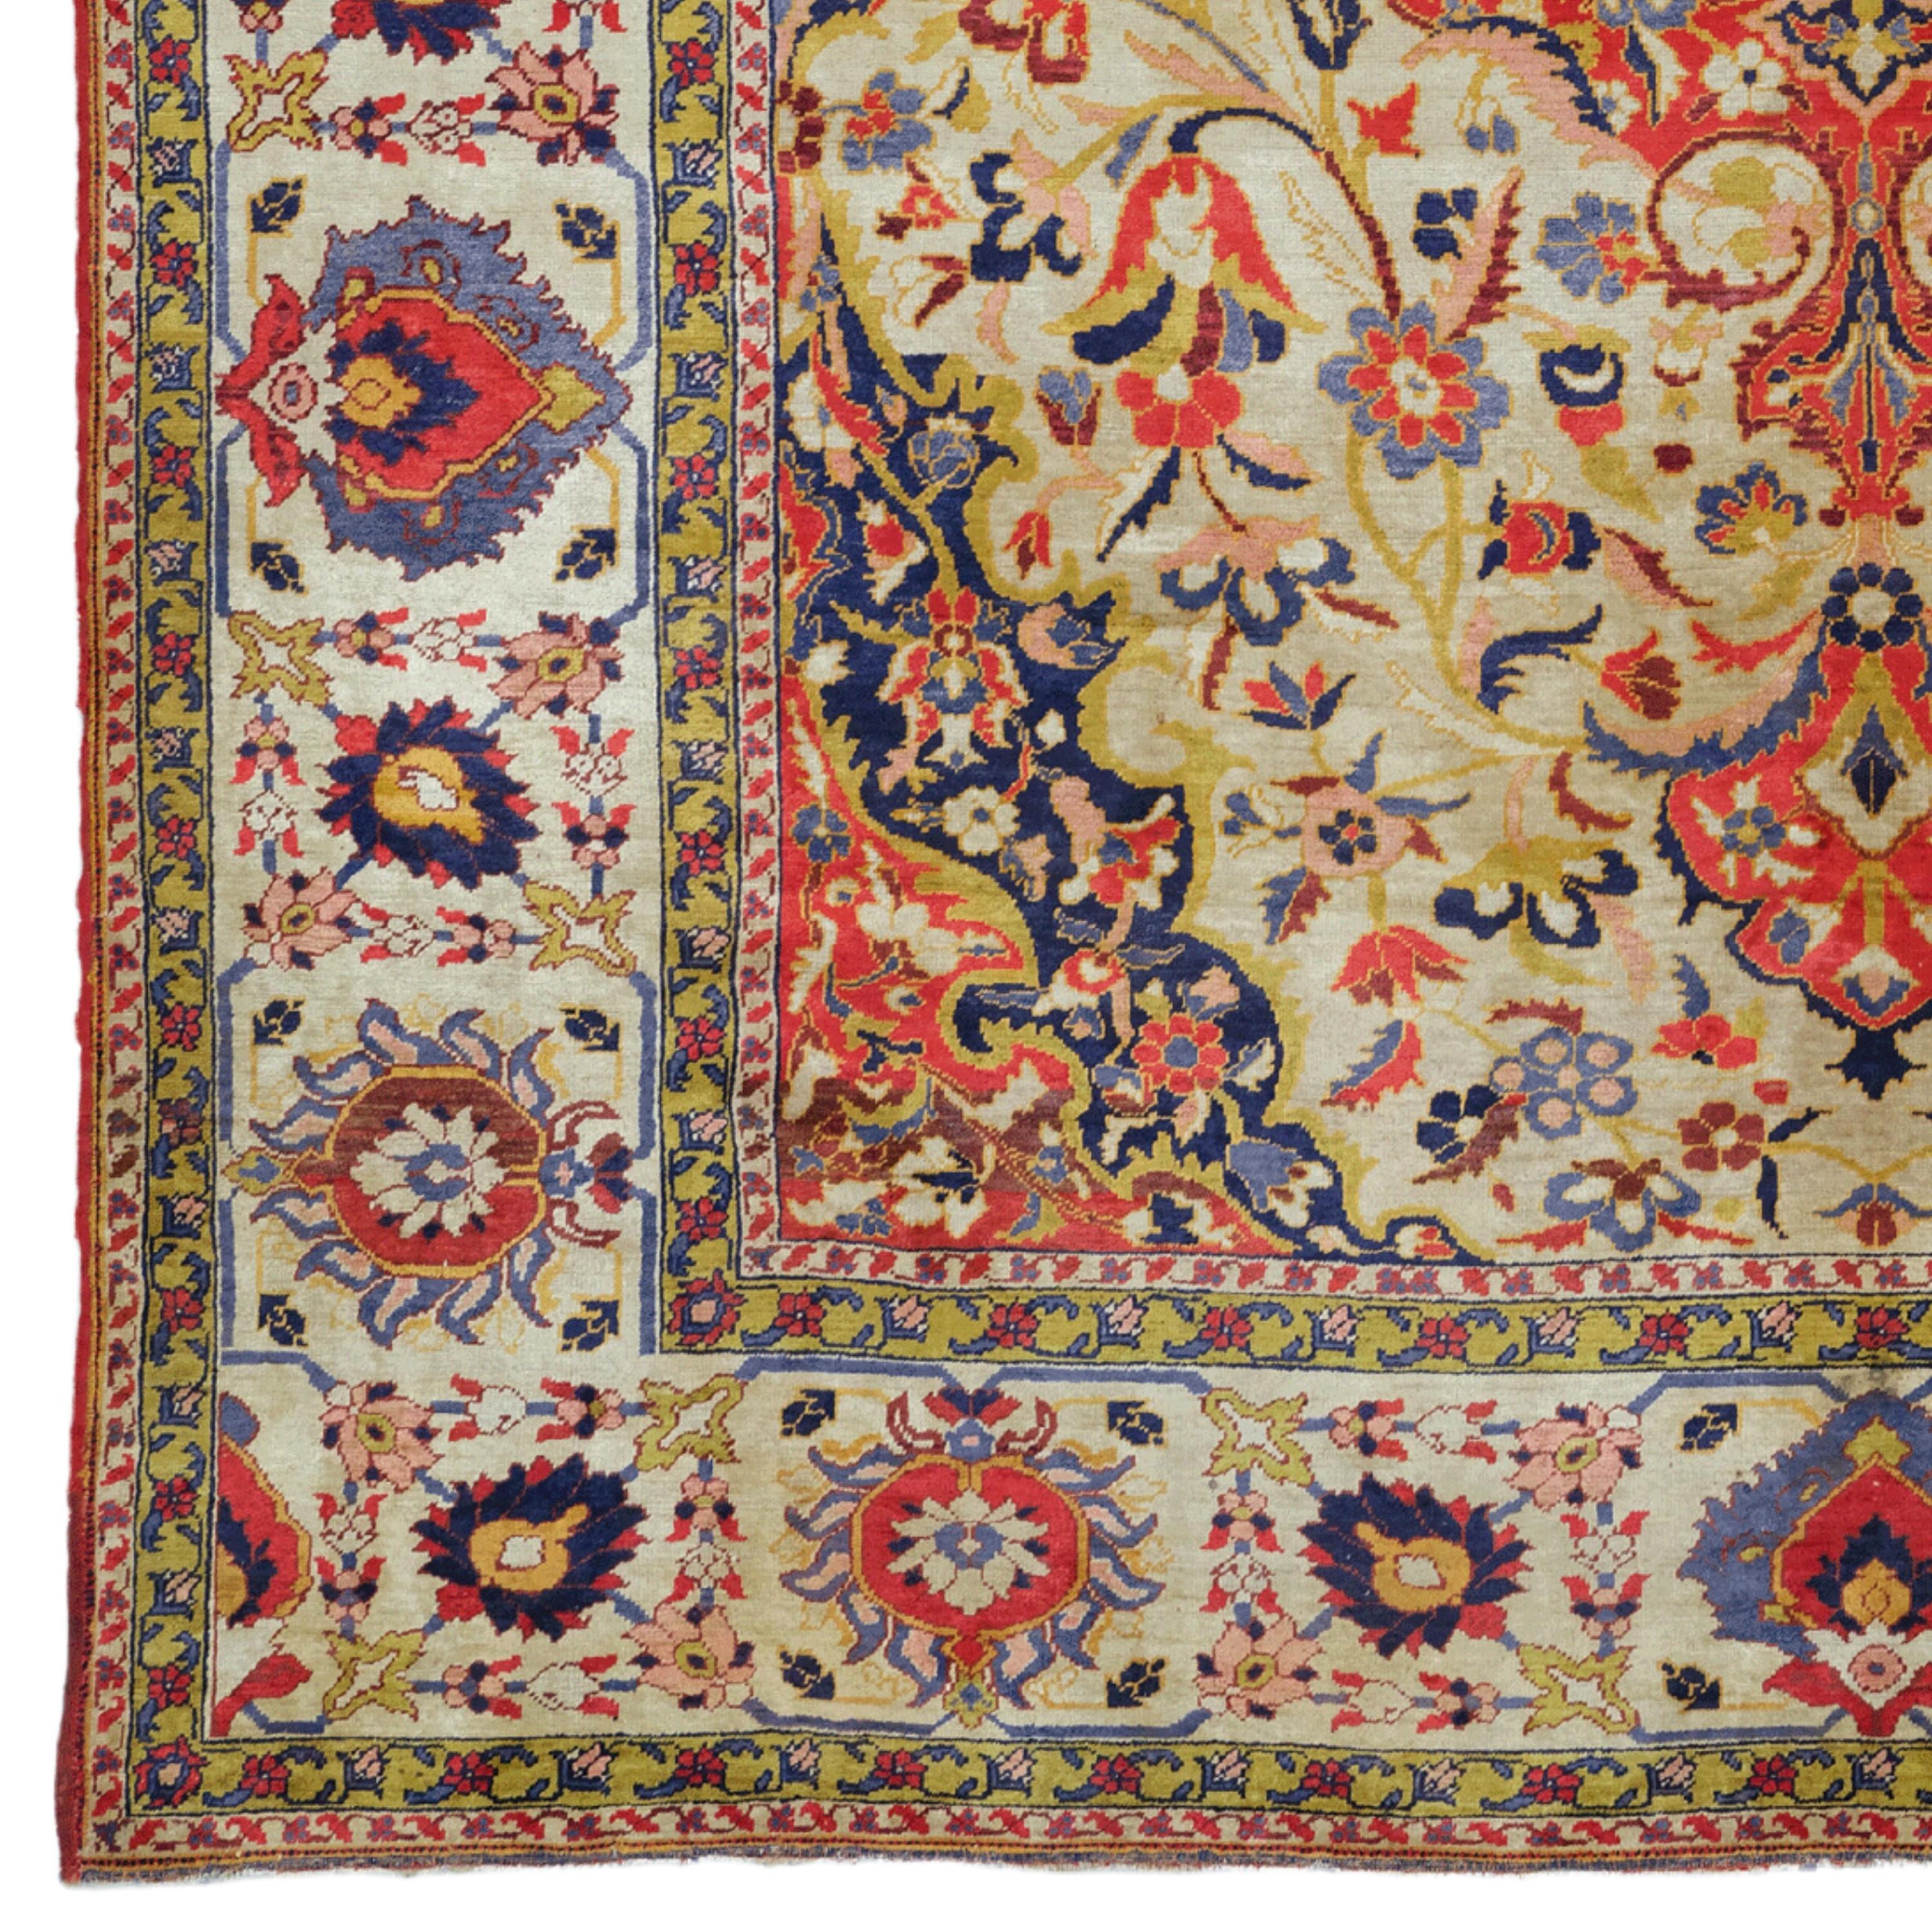 Hand knotted in Turkey between 1880-1890, Antique Sivas Silk Rug

This rare 19th-century silk Sivas carpet represents the exquisite art and craft of the Ottoman period. With its rich color palette and detailed patterns, this carpet is perfect for